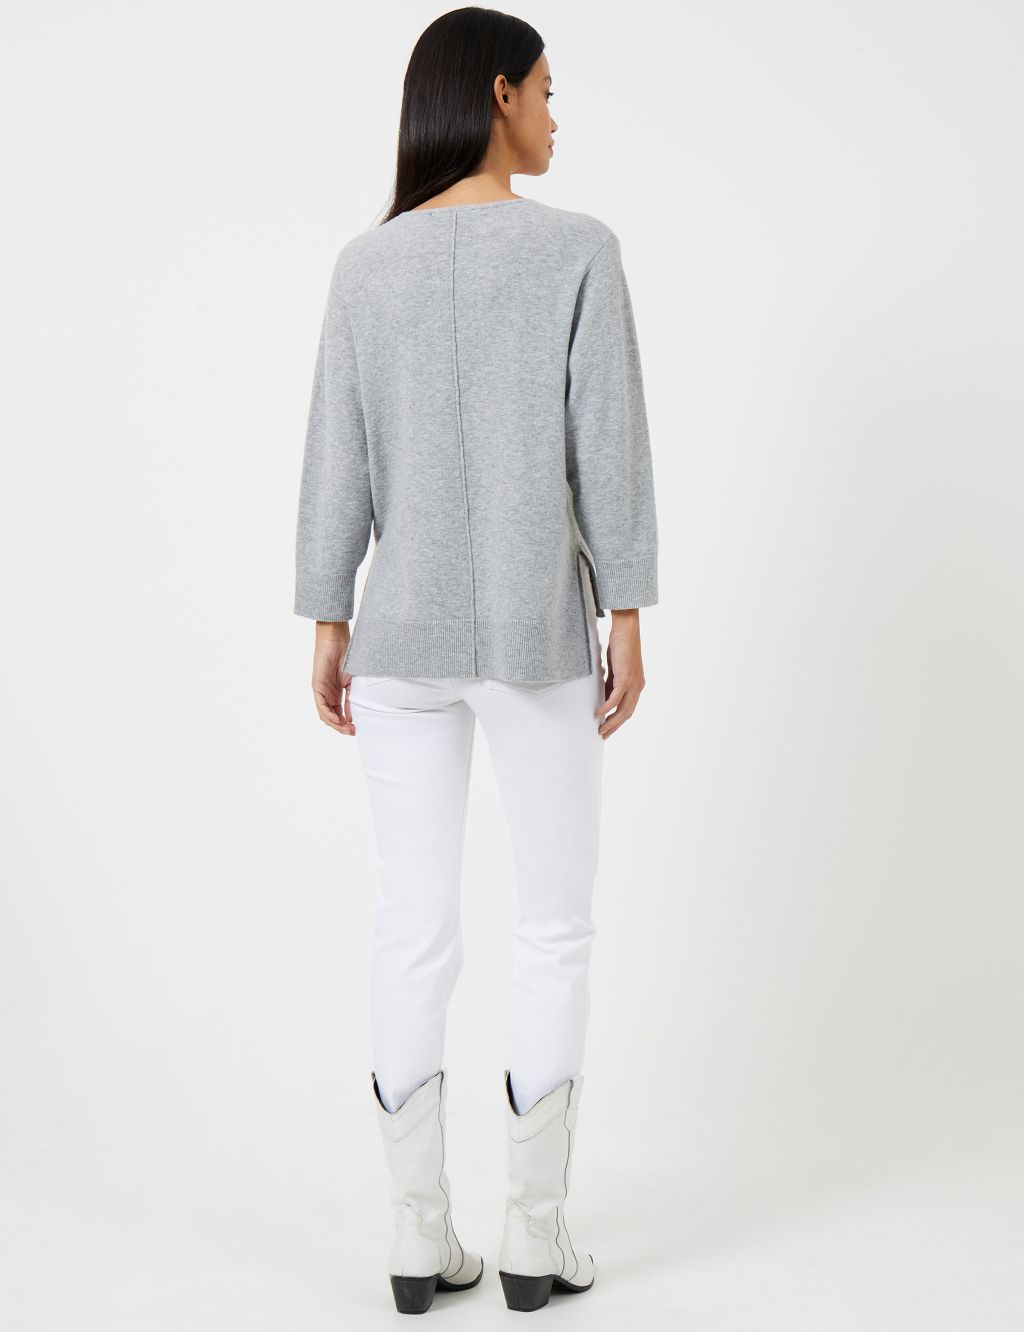 Textured V-Neck Relaxed Jumper with Wool image 4